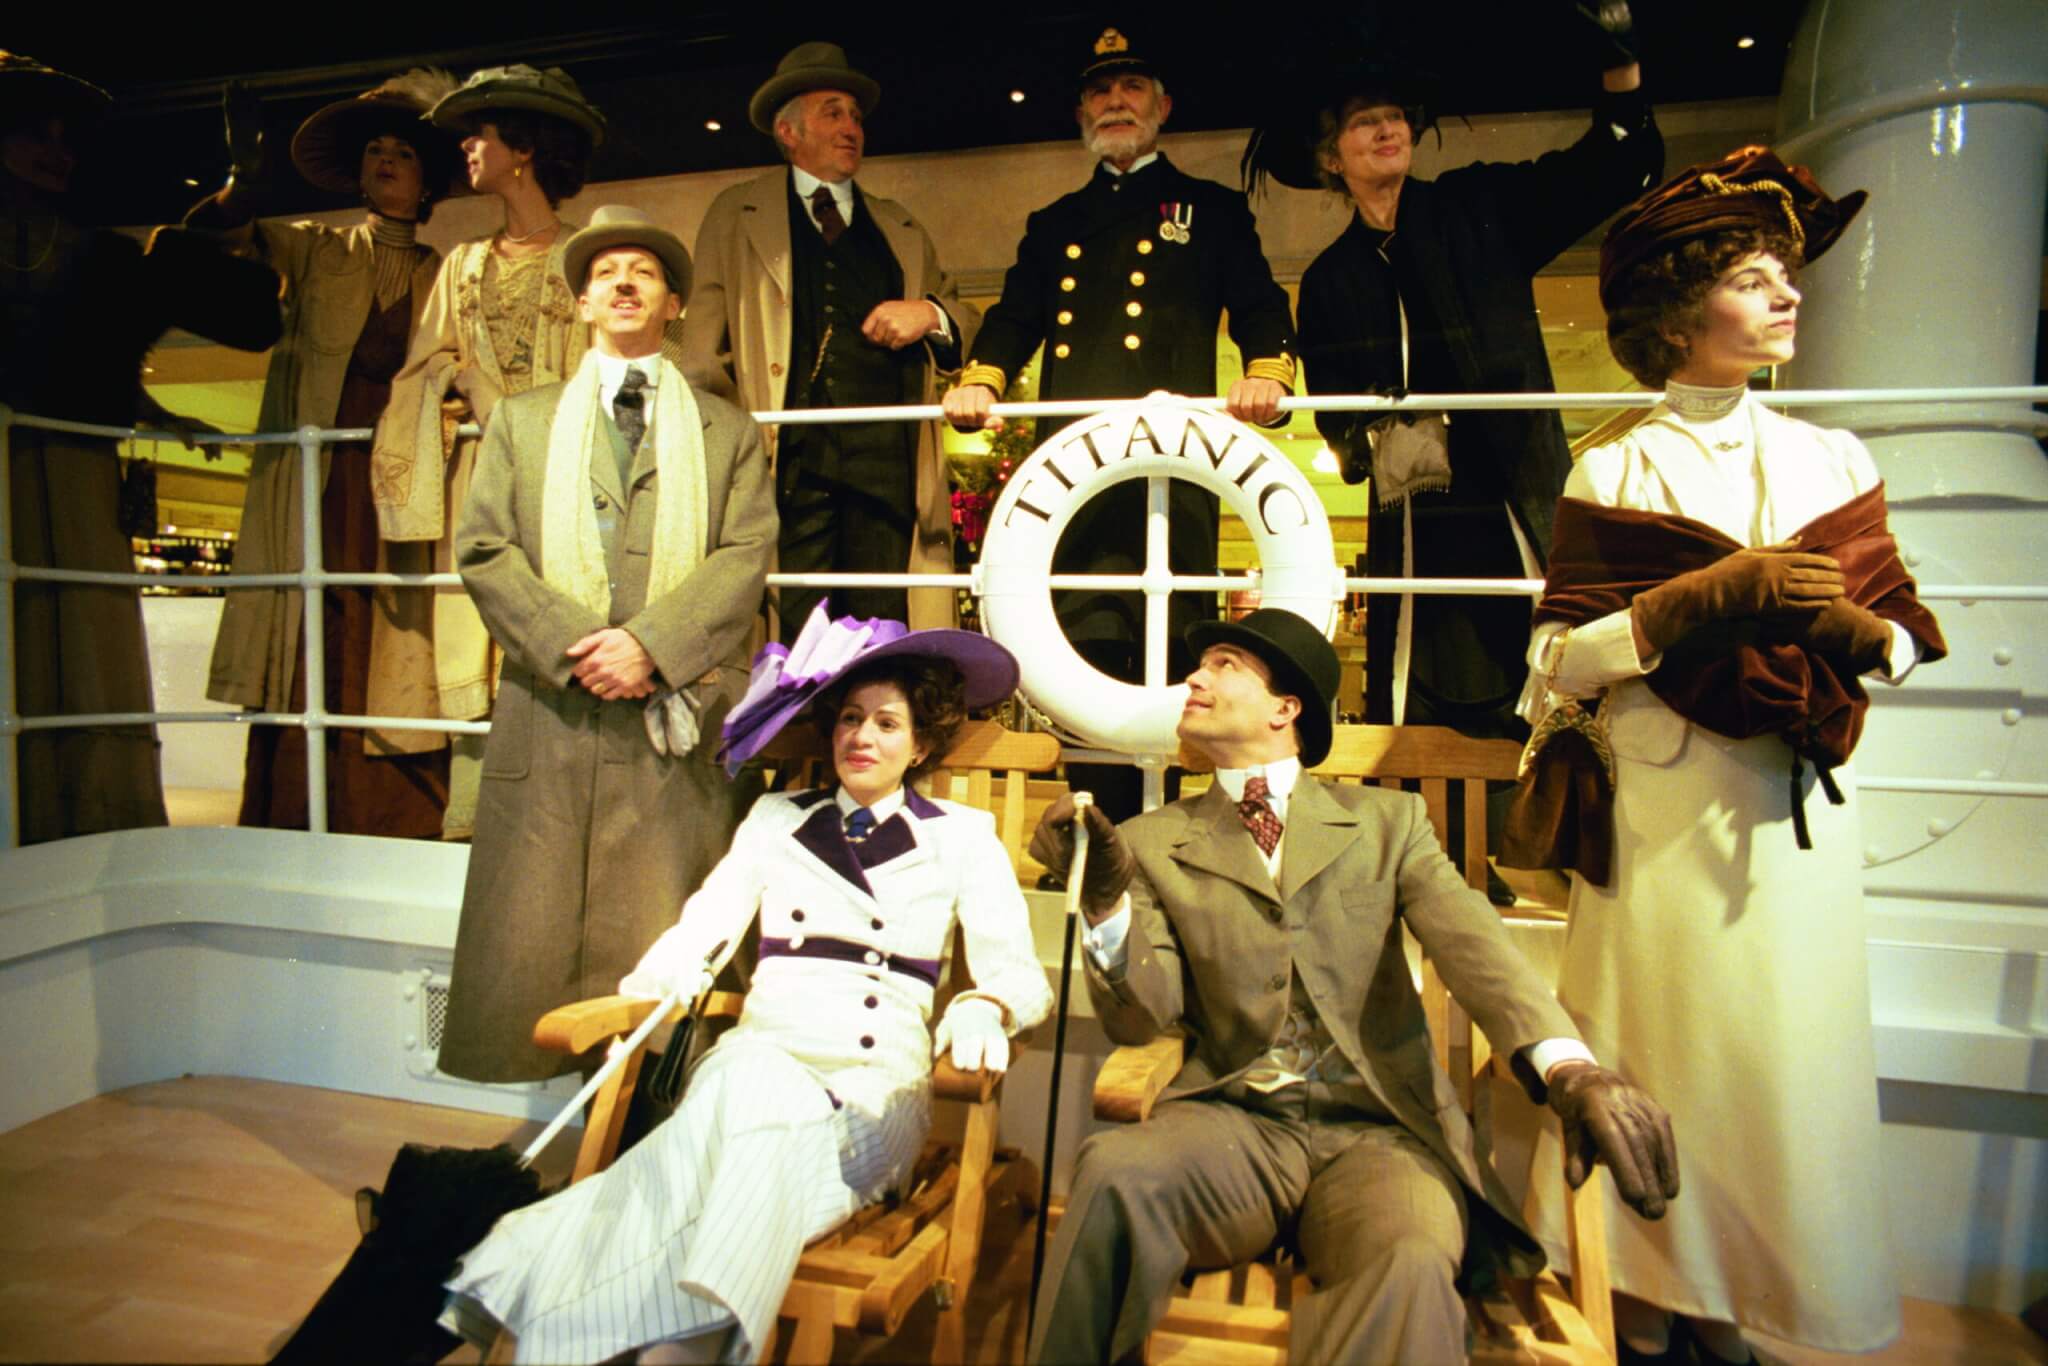 The Front Window Of Harrods Was Transformed This Morning Into The First Class Promenade Deck Of The Titanic With Actors And Actresses In Period Costume To Launch Titanic The Video.